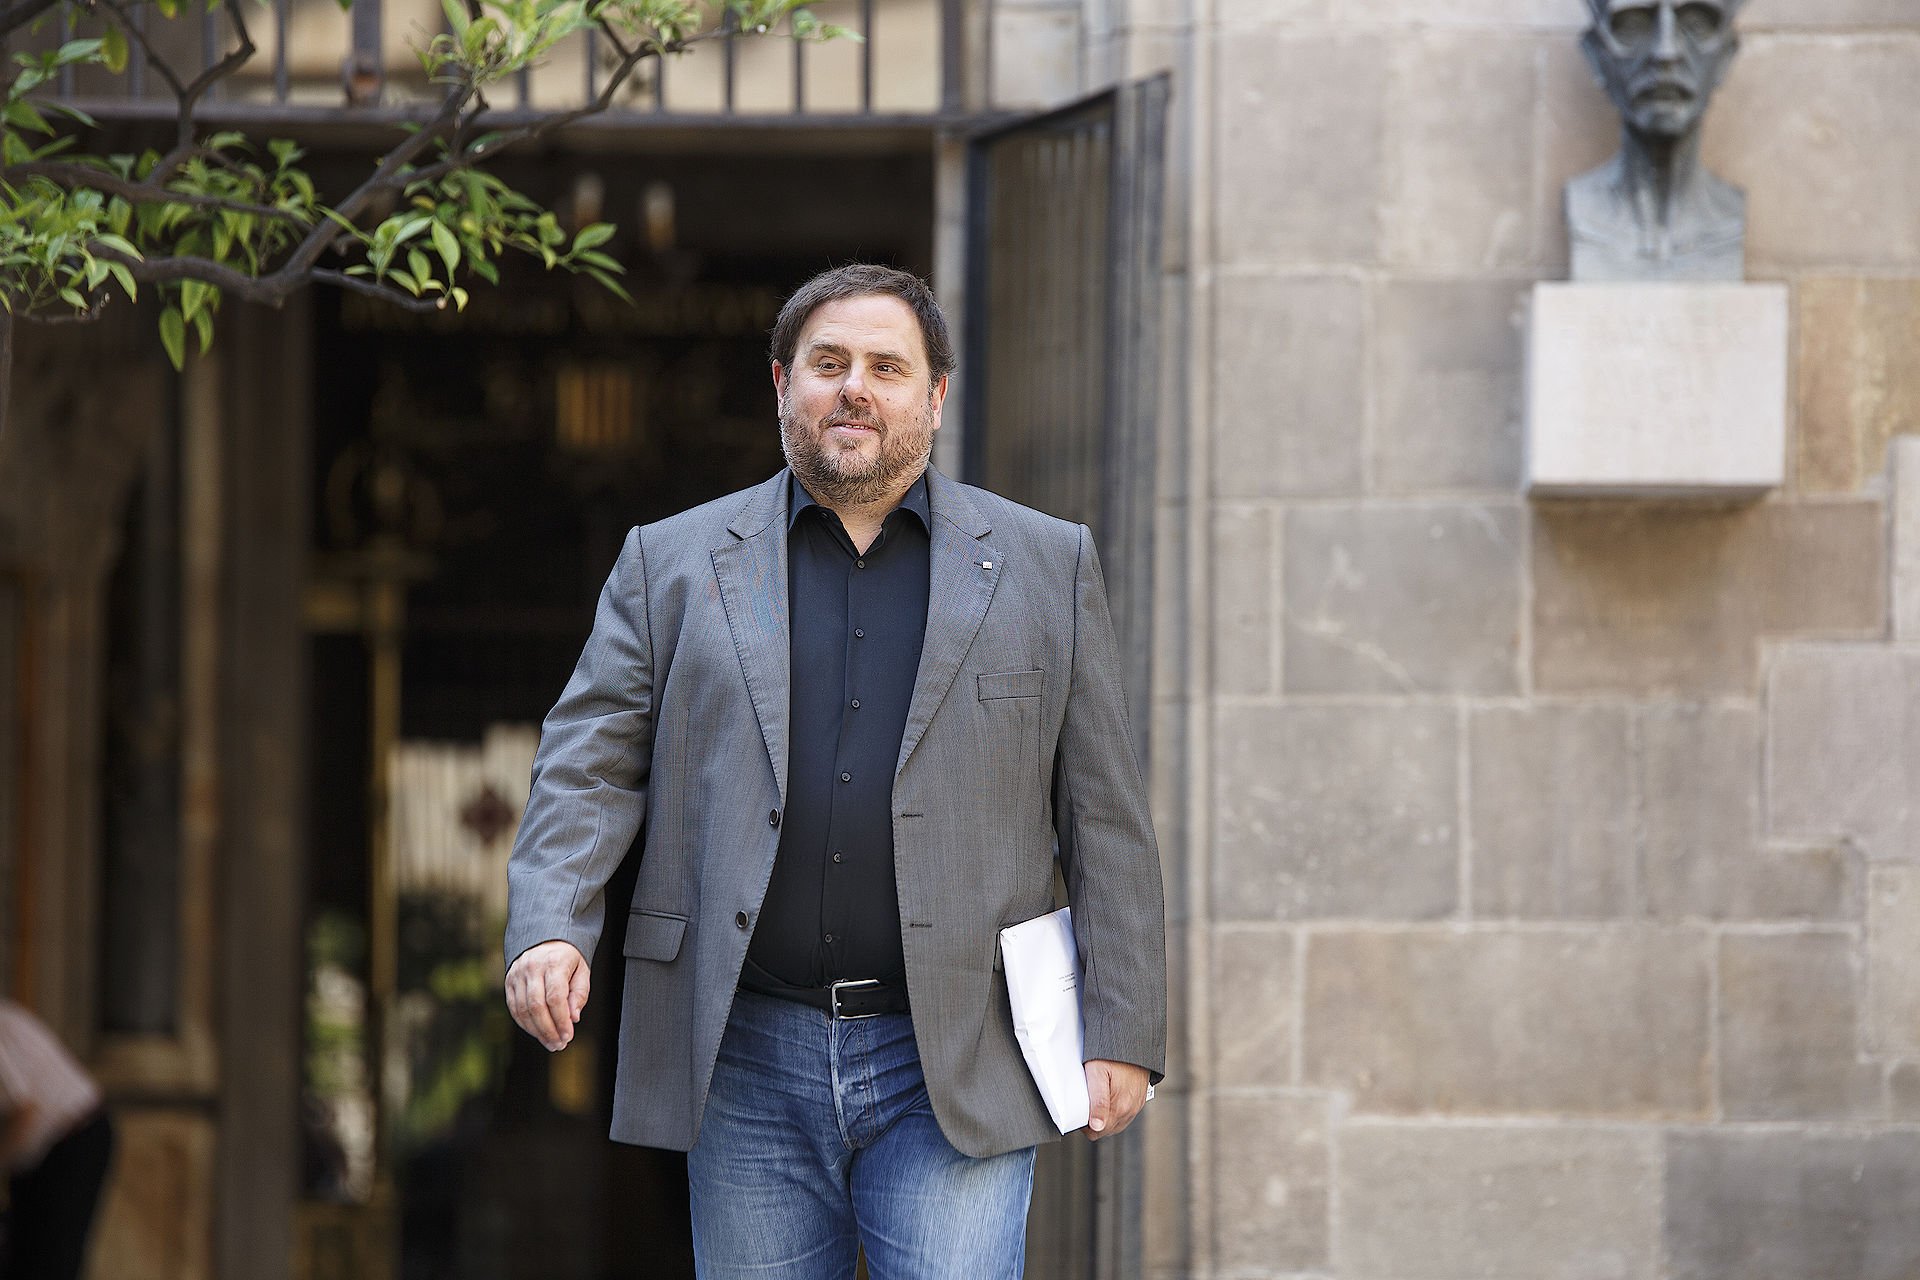 Spain's state solicitors study plan to accredit Junqueras as an MEP in Madrid